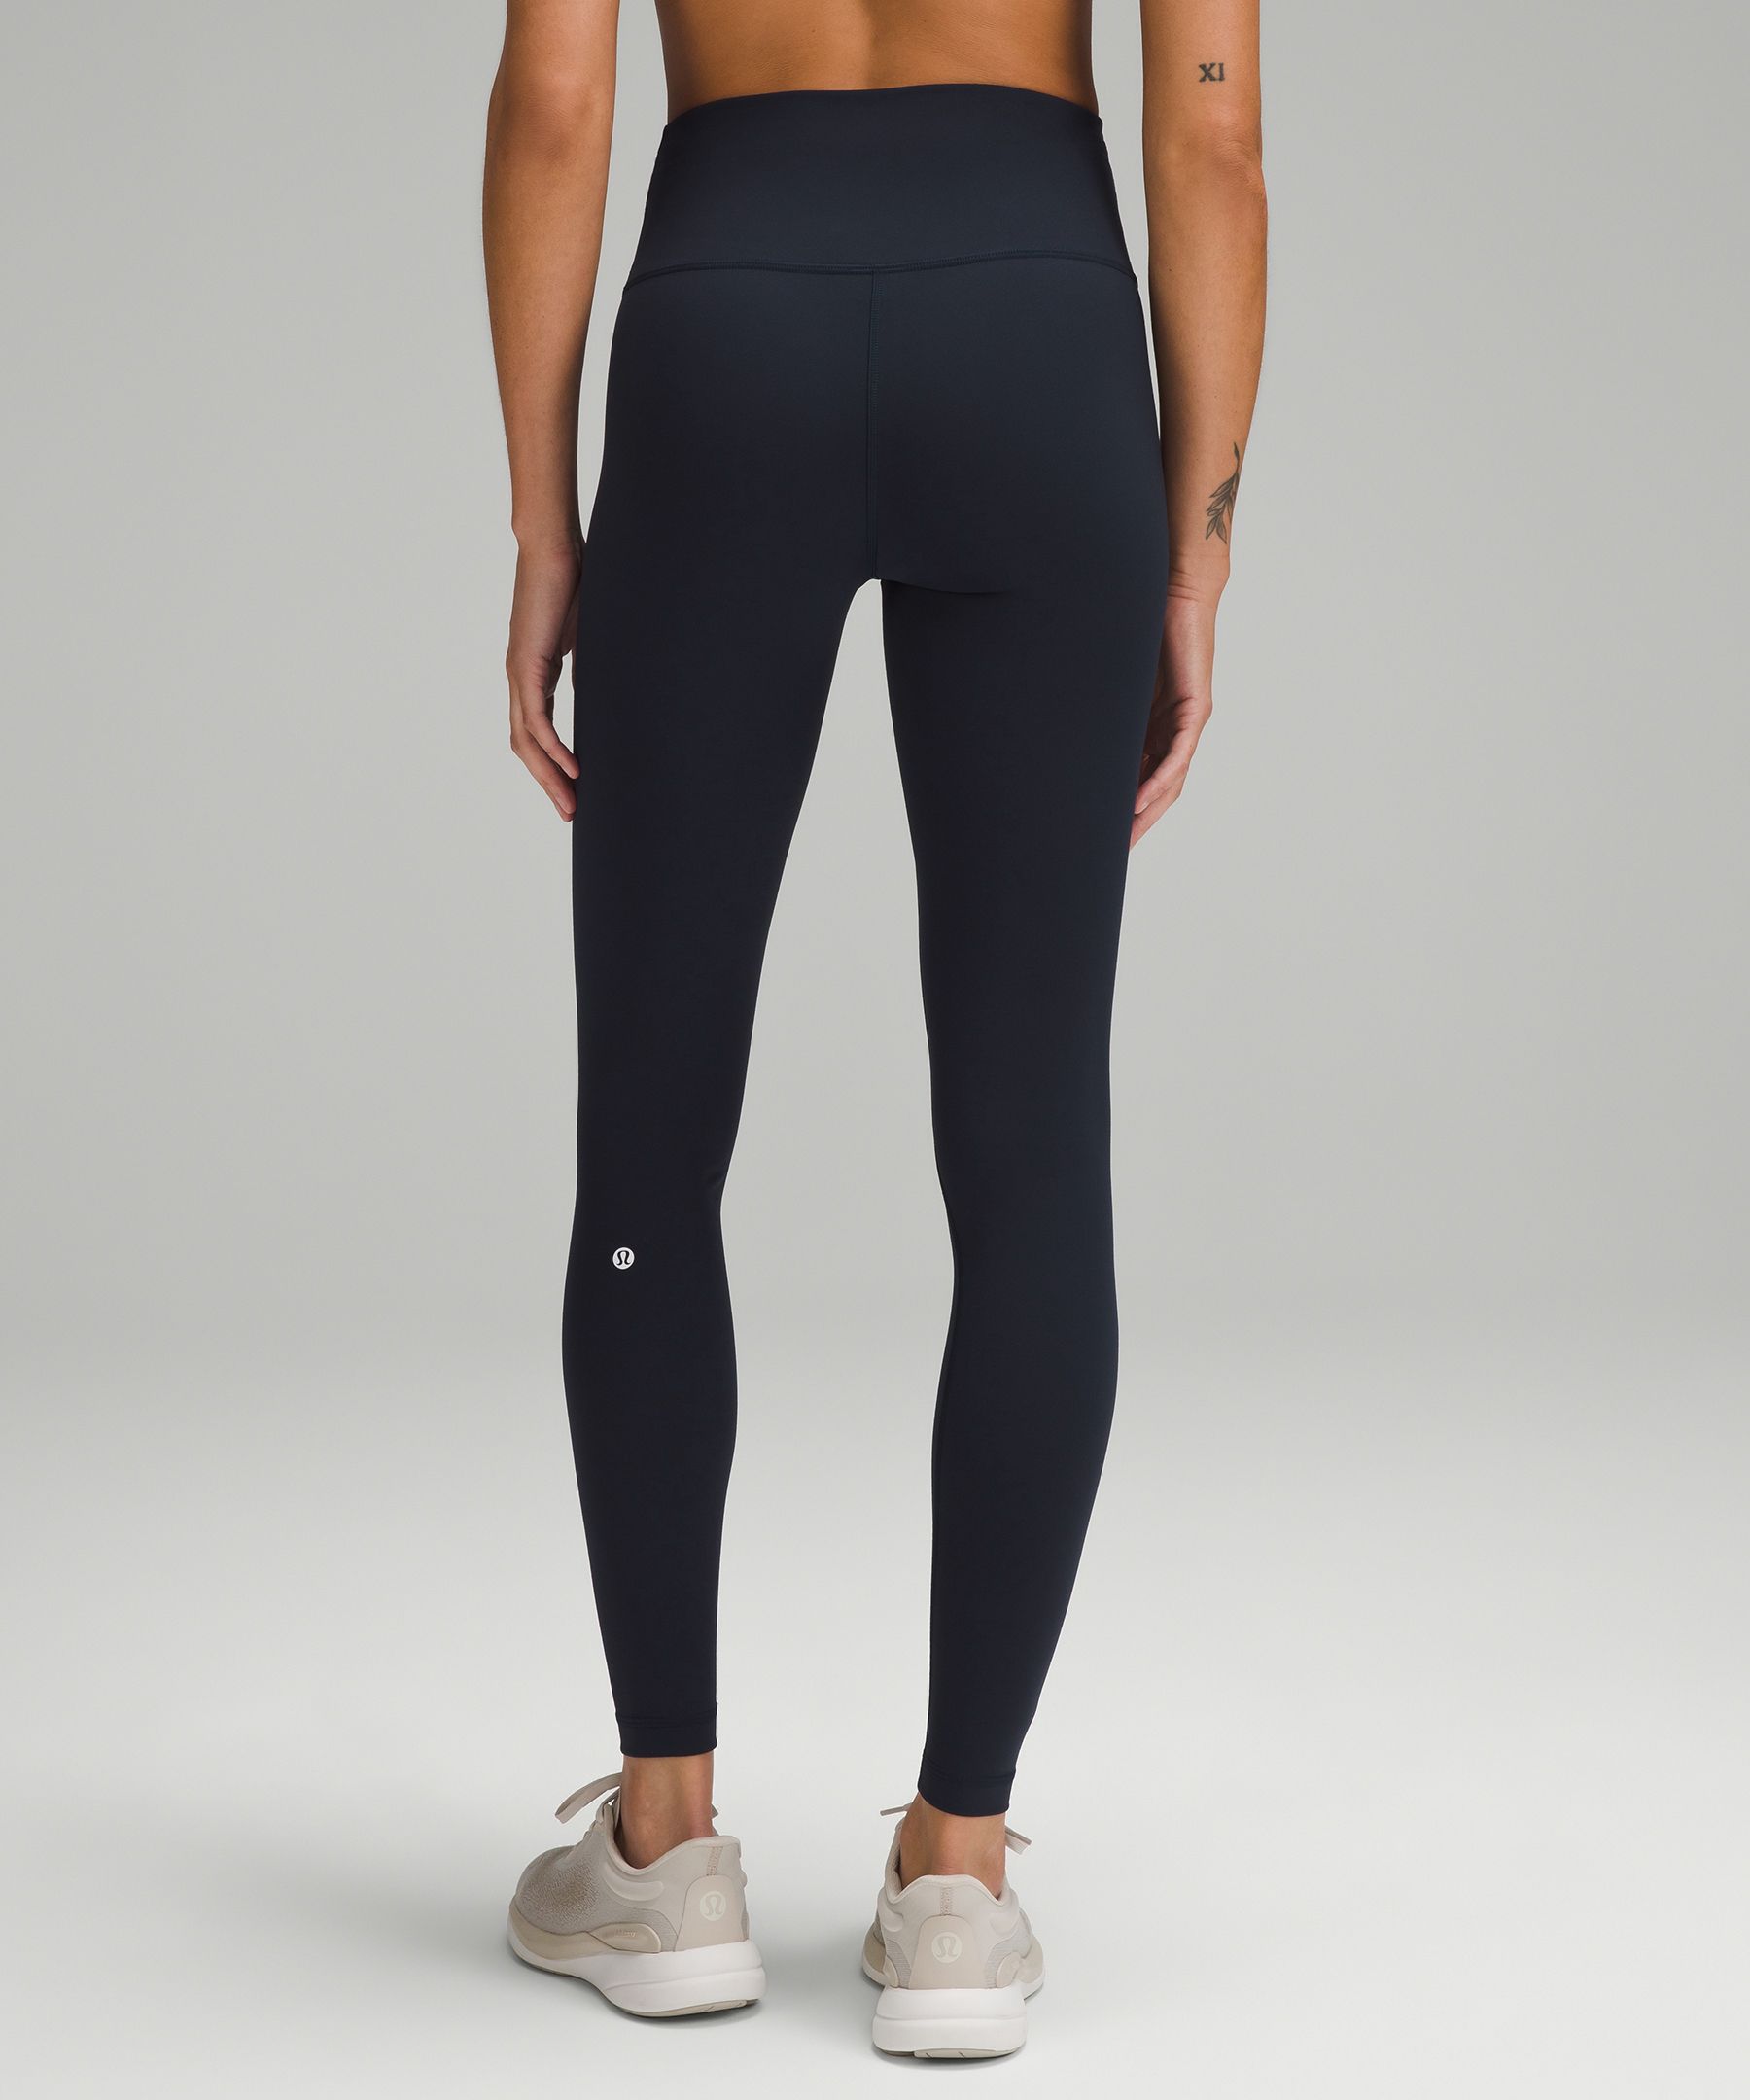 Lululemon Wunder Under Hi-Rise 7/8 Tight *25 In Heather Black Size 8 EUC  Gray - $58 (40% Off Retail) - From Breea